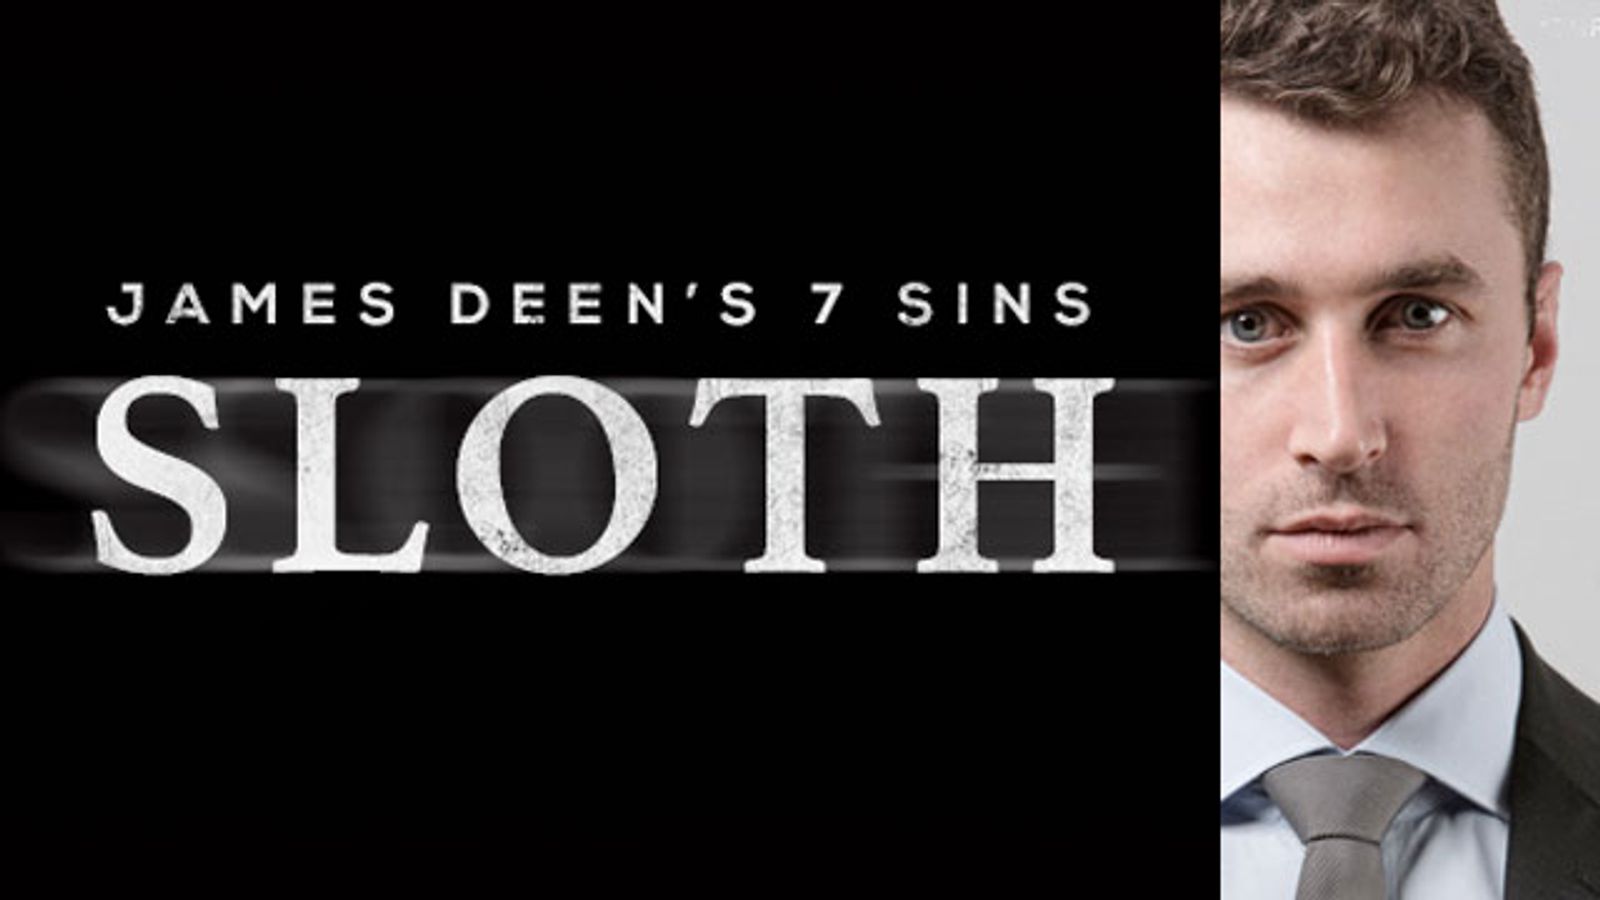 Deen's Year of Sin Ends With 'Sloth' Online, 'Wrath' on the Way